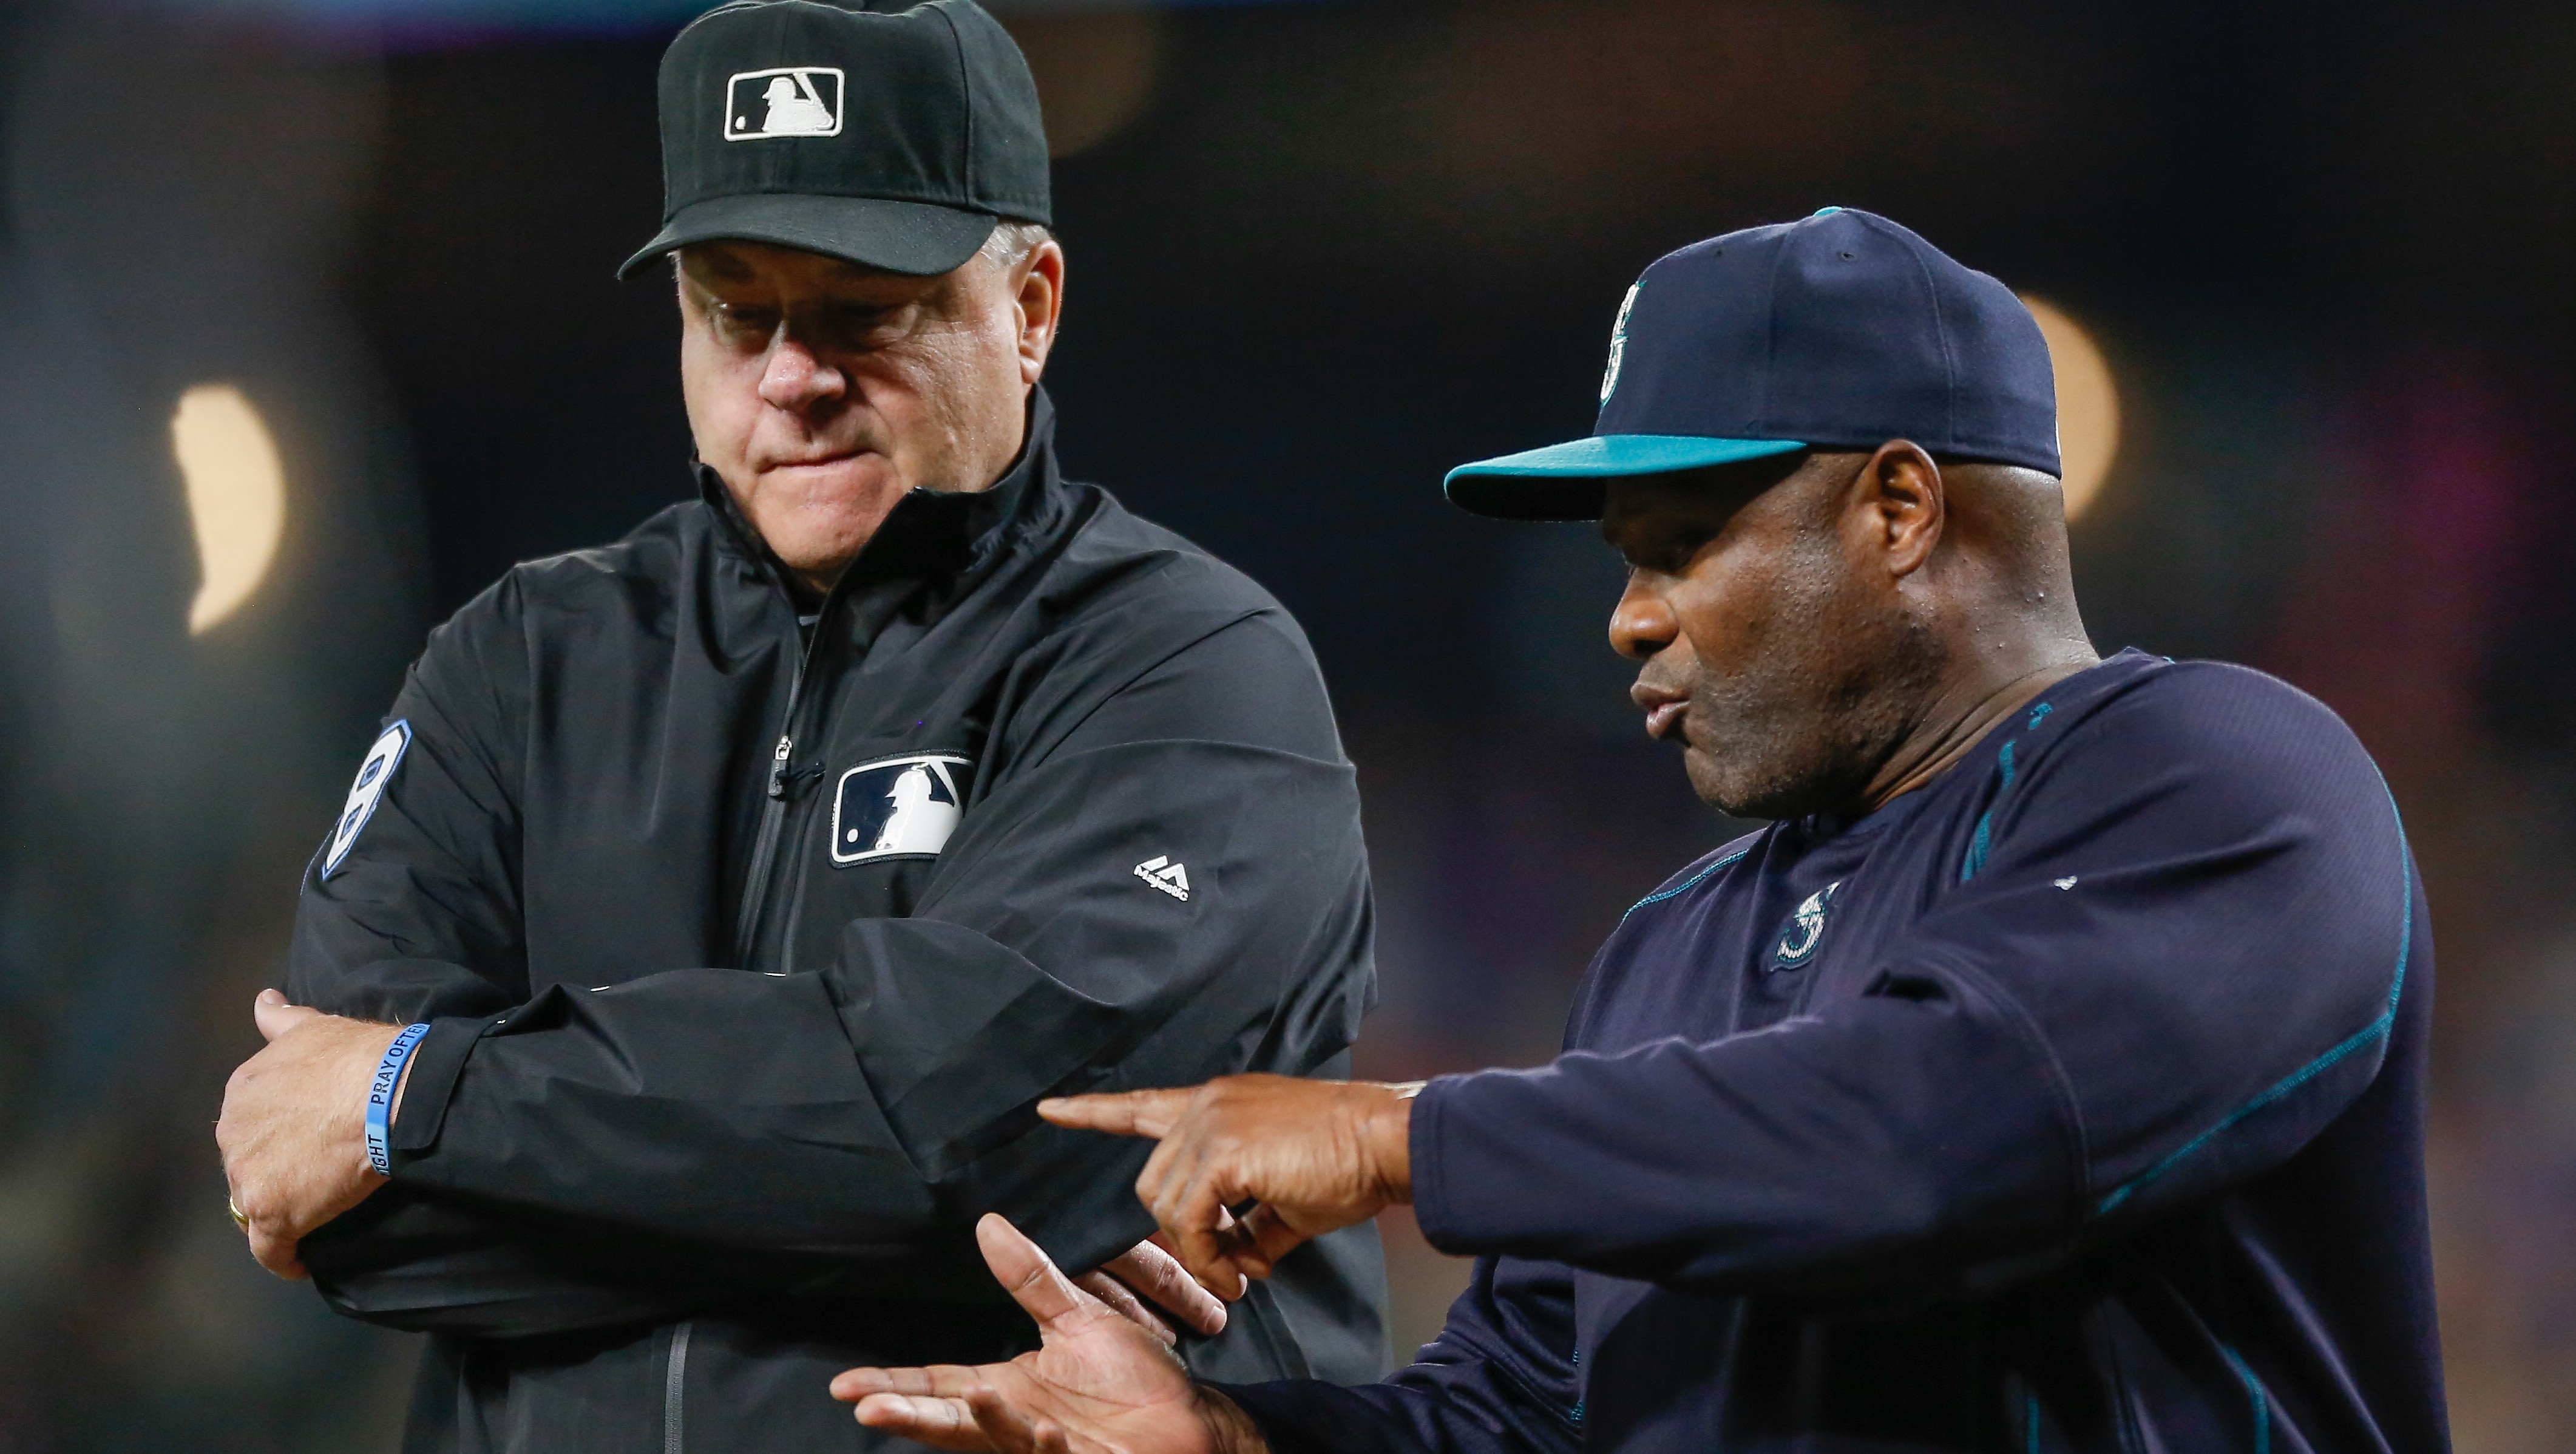 Who Are the Umpires For the World Series?